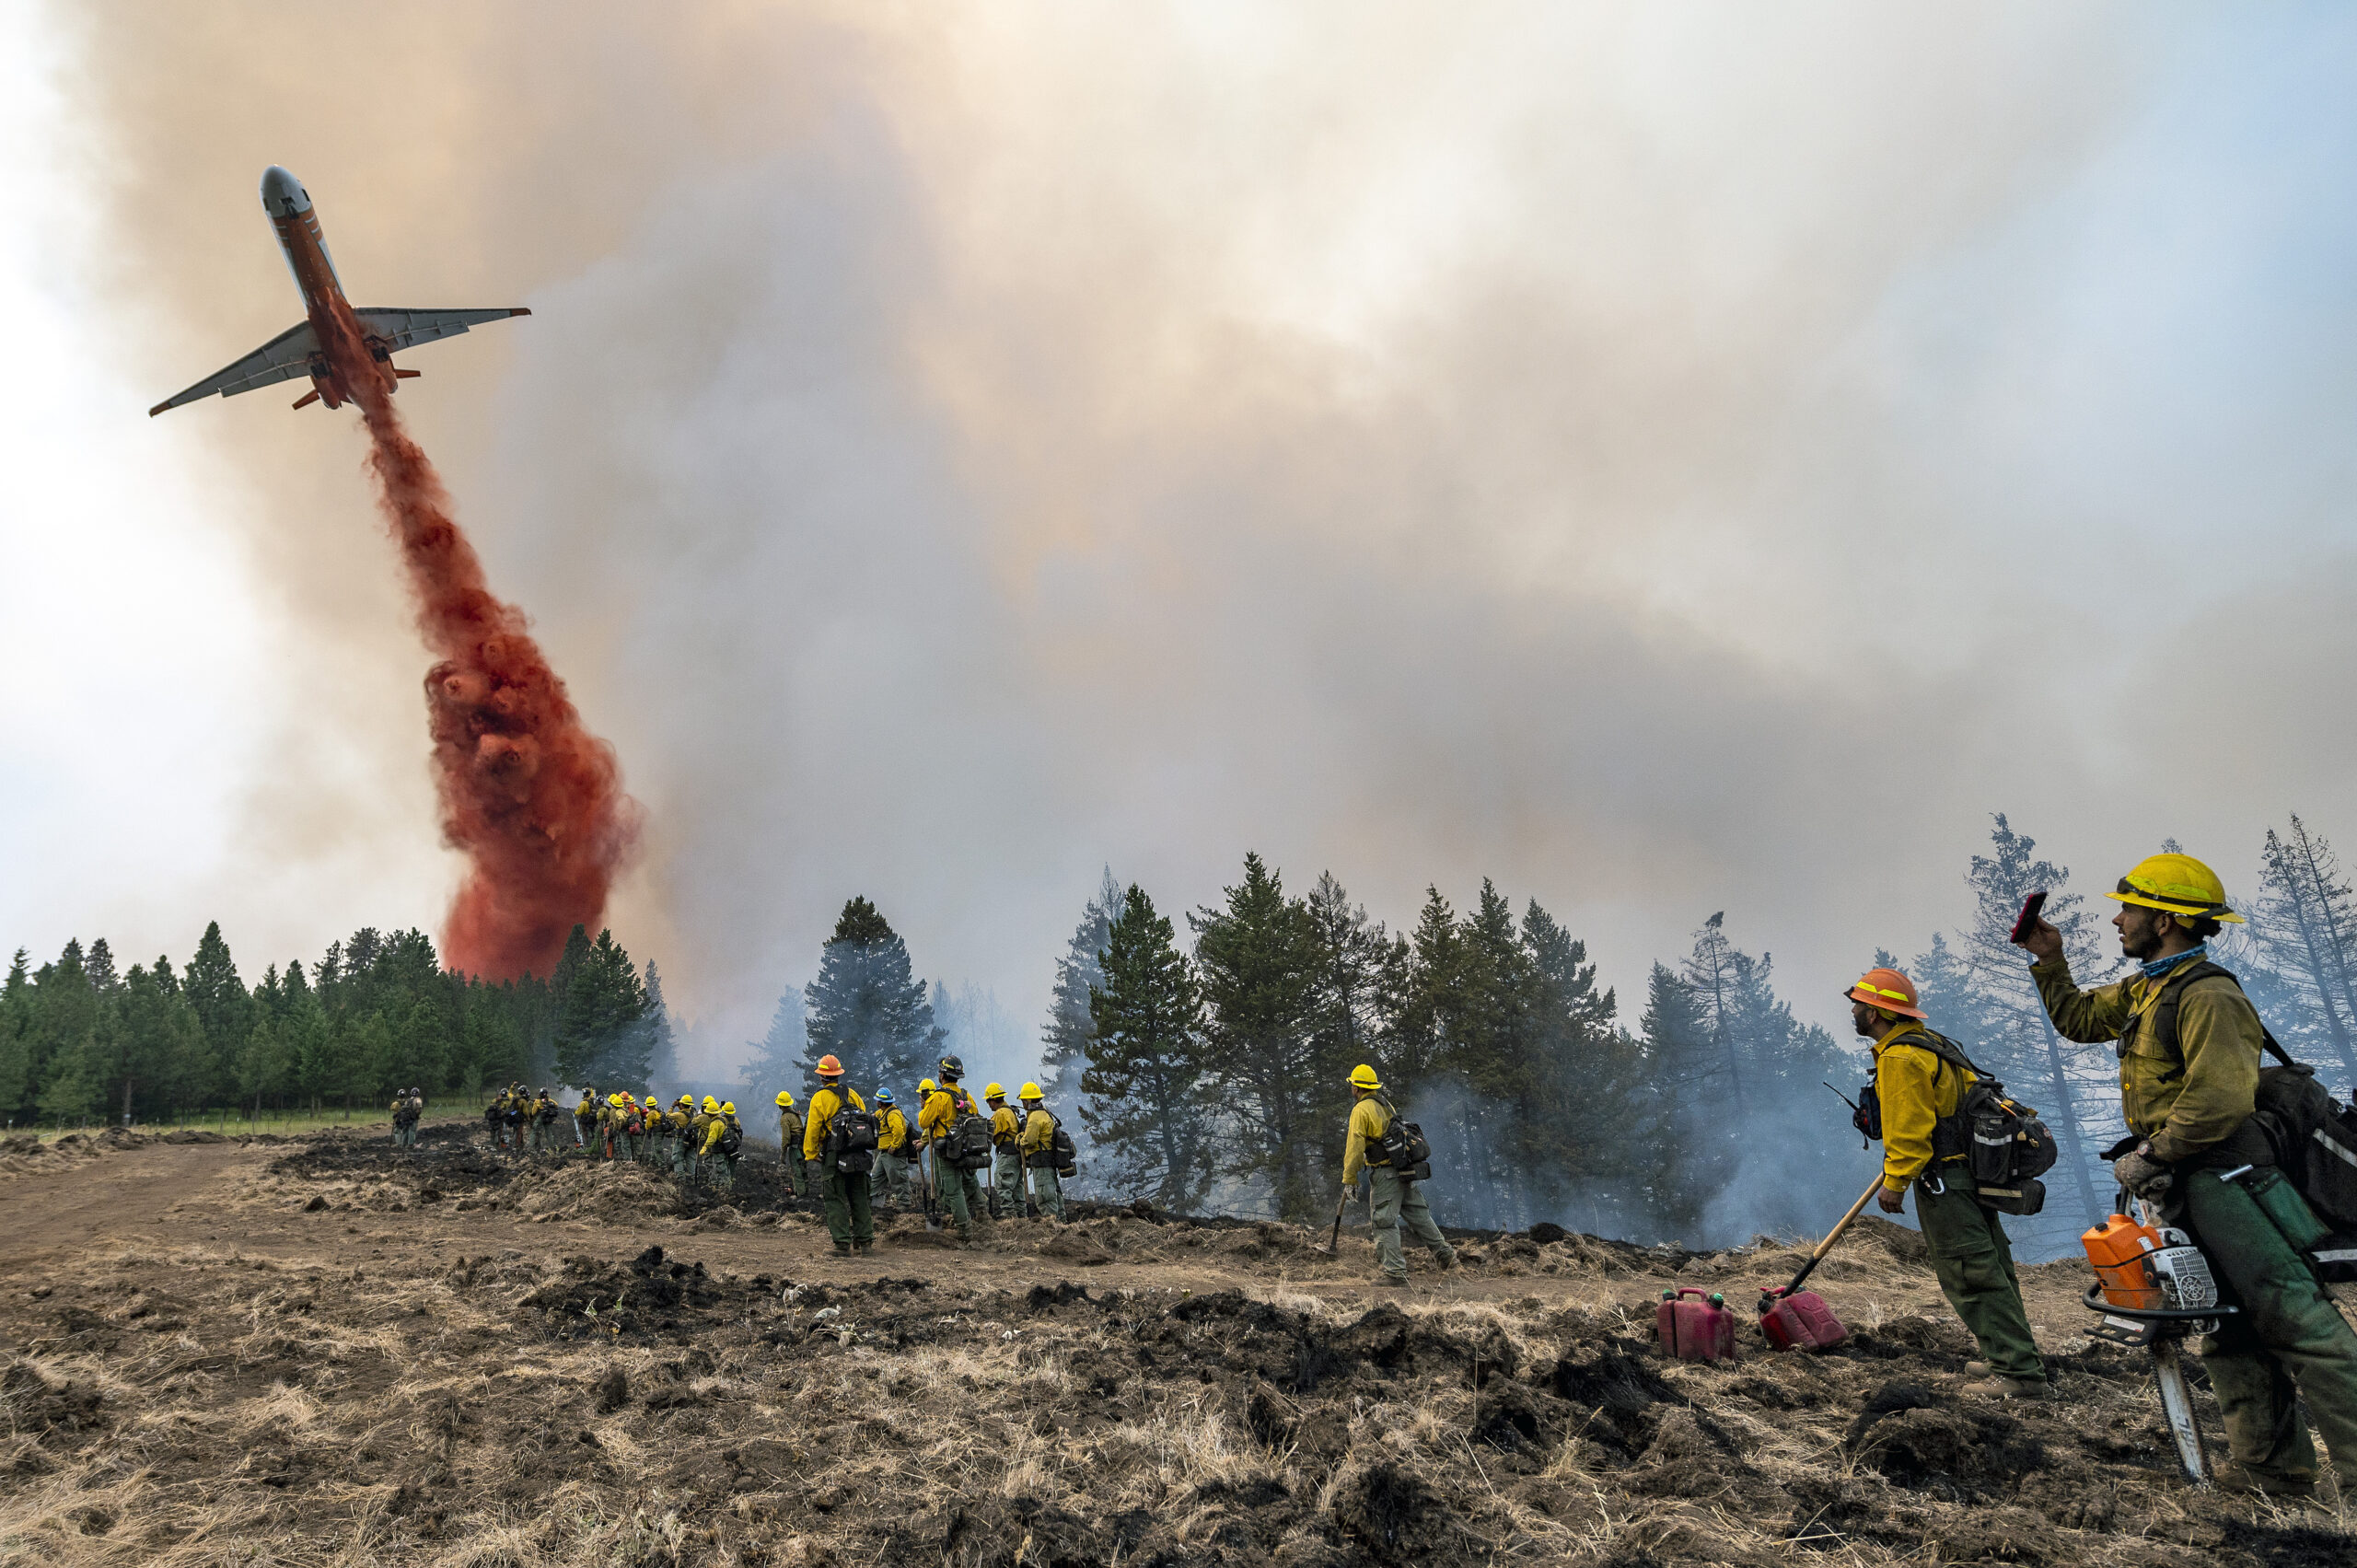 Wildland firefighters watch and take video with their cellphones as a plane drops fire retardant on Harlow Ridge above the Lick Creek Fire, southwest of Asotin, Wash., Monday, July 12, 2021. The fire, which started last Wednesday, has now burned over 50,000 acres of land between Asotin County and Garfield County in southeast Washington state. (Pete Caster/Lewiston Tribune via AP)